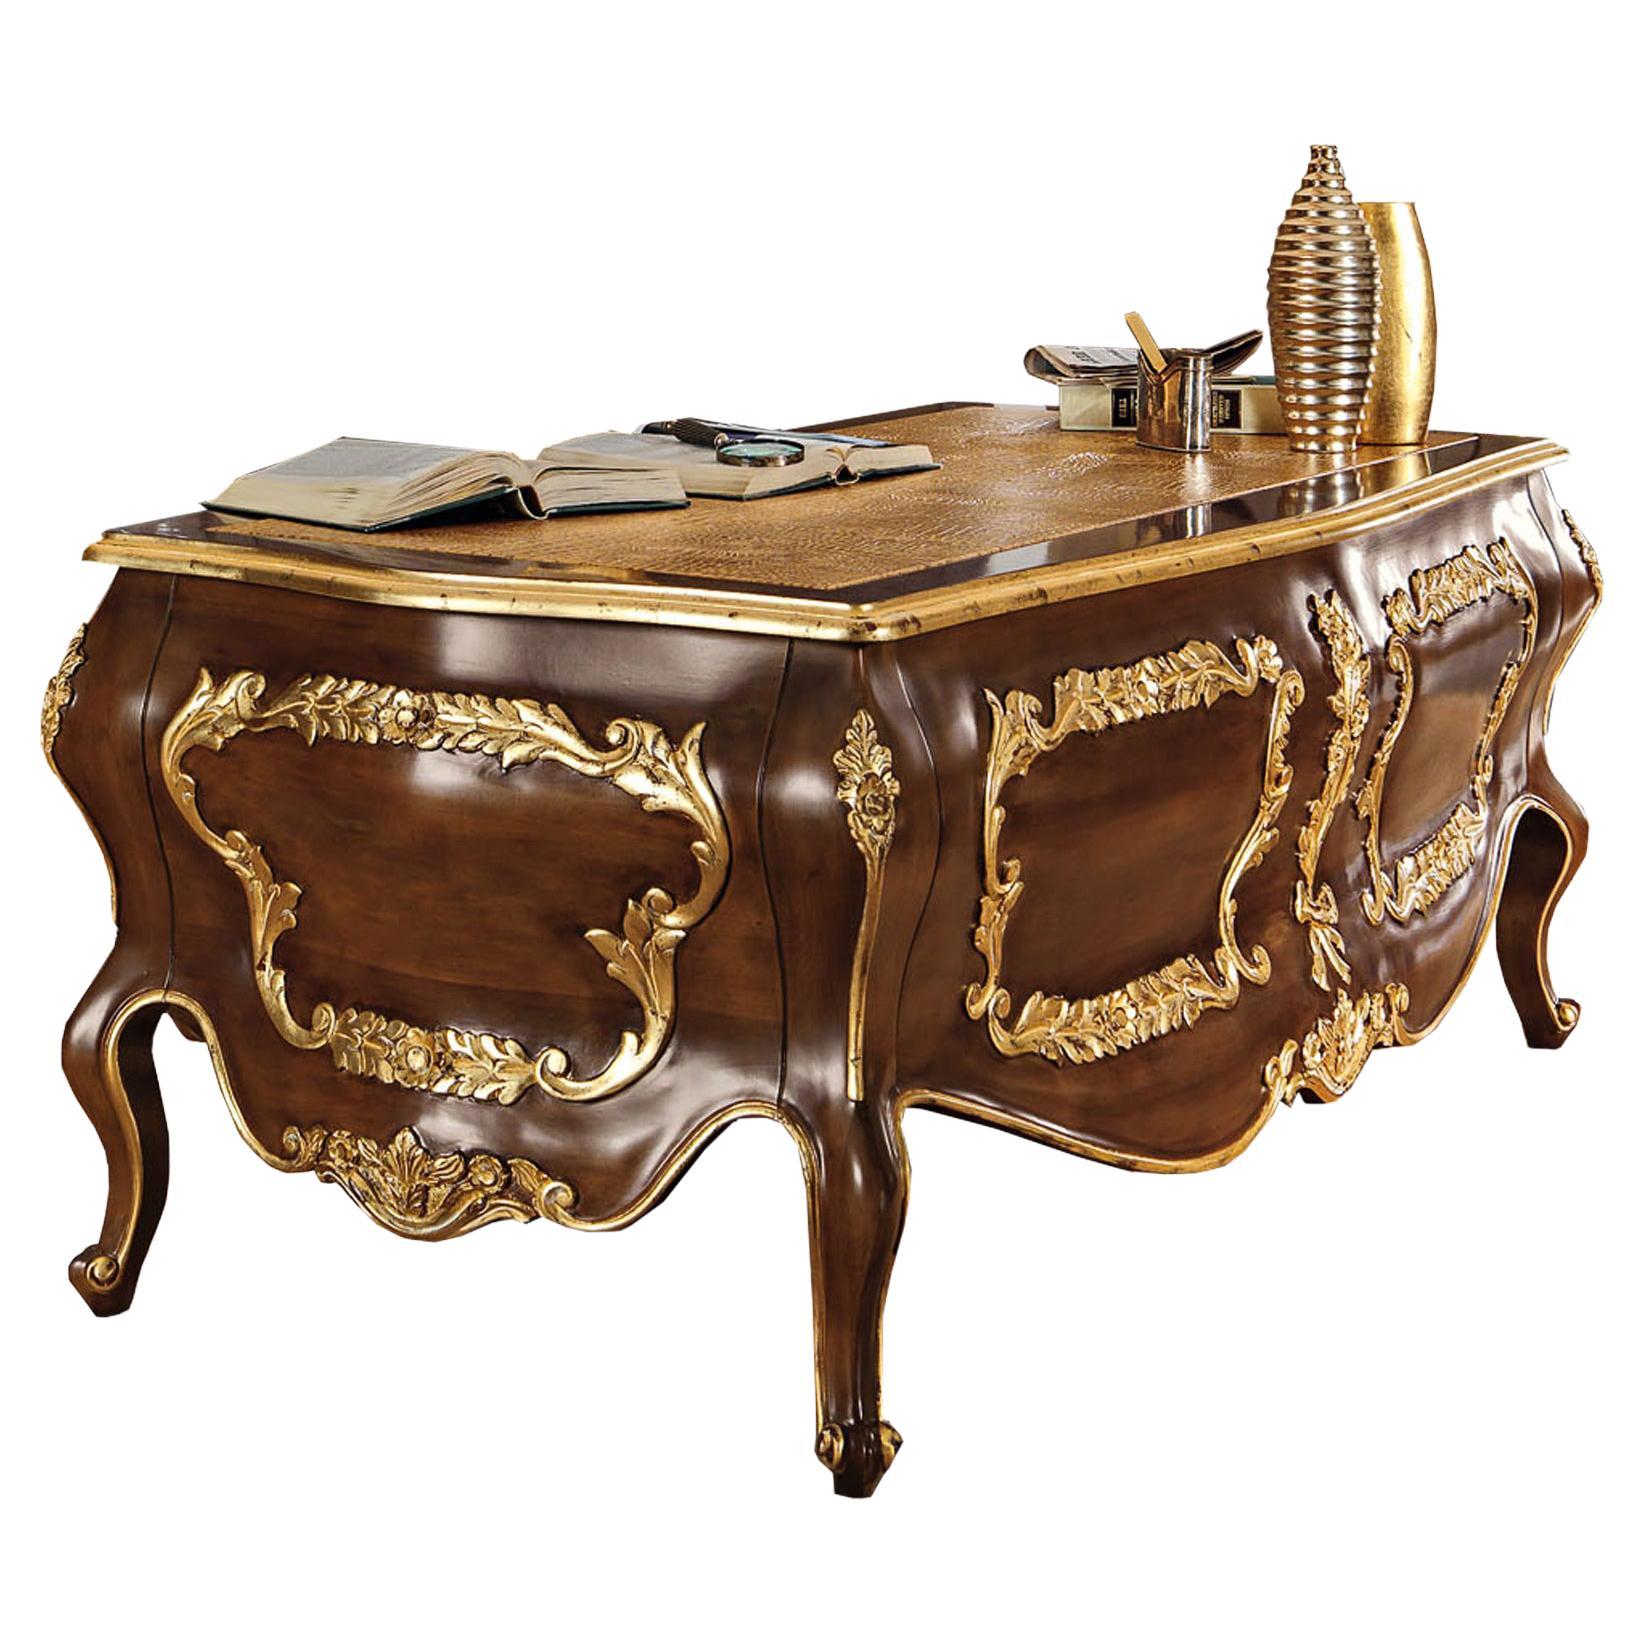 Rounded Luxury Classical Office Desk, Gold Leaf by Modenese Gastone Interiors